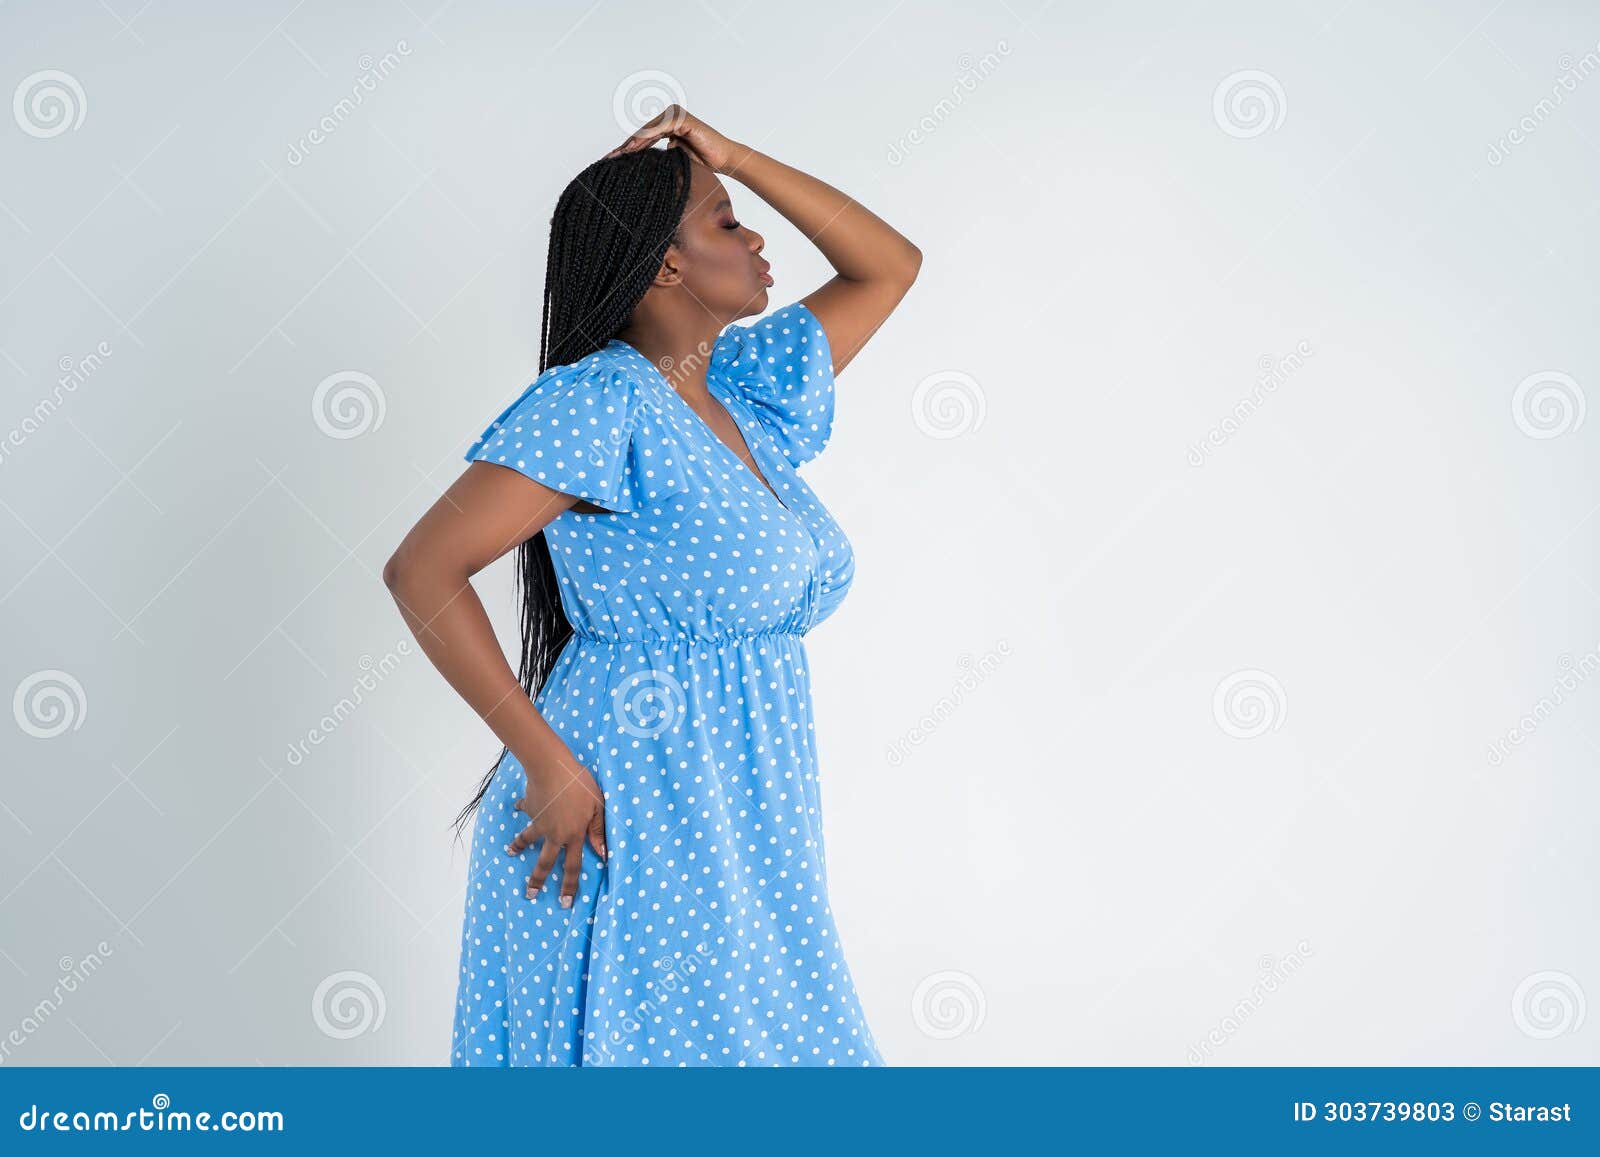 Plus Size Female Model Posing in Blue Dress on White Background, Young  African Woman with Curvy Figure and Pigtailed Hairstyle, Stock Image -  Image of breast, braid: 303739793